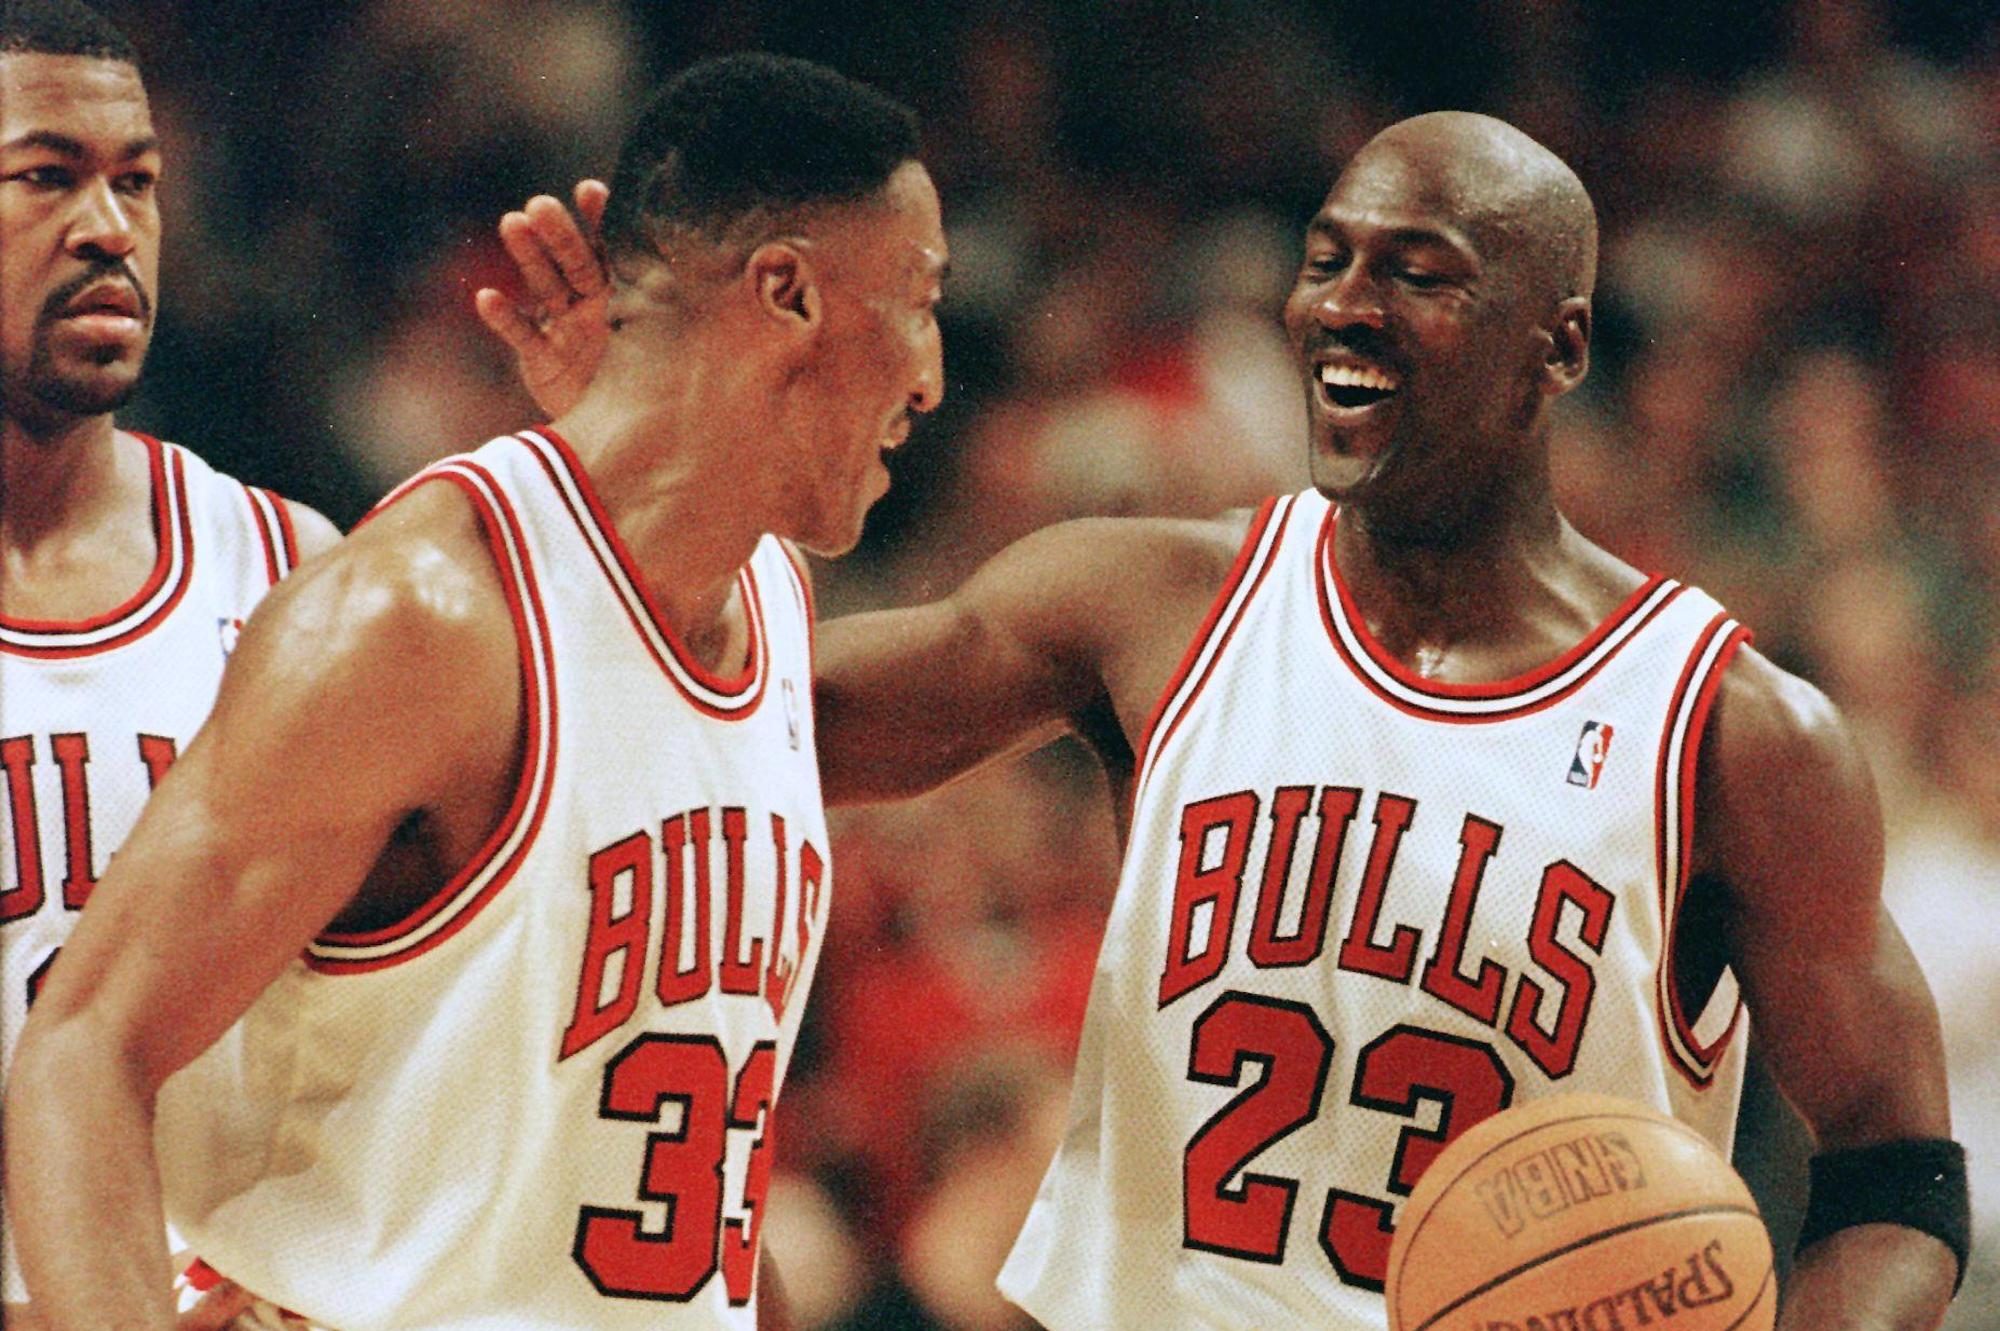 The Last Dance” Shows a Michael Jordan You May Know and a Scottie Pippen  You Probably Don't